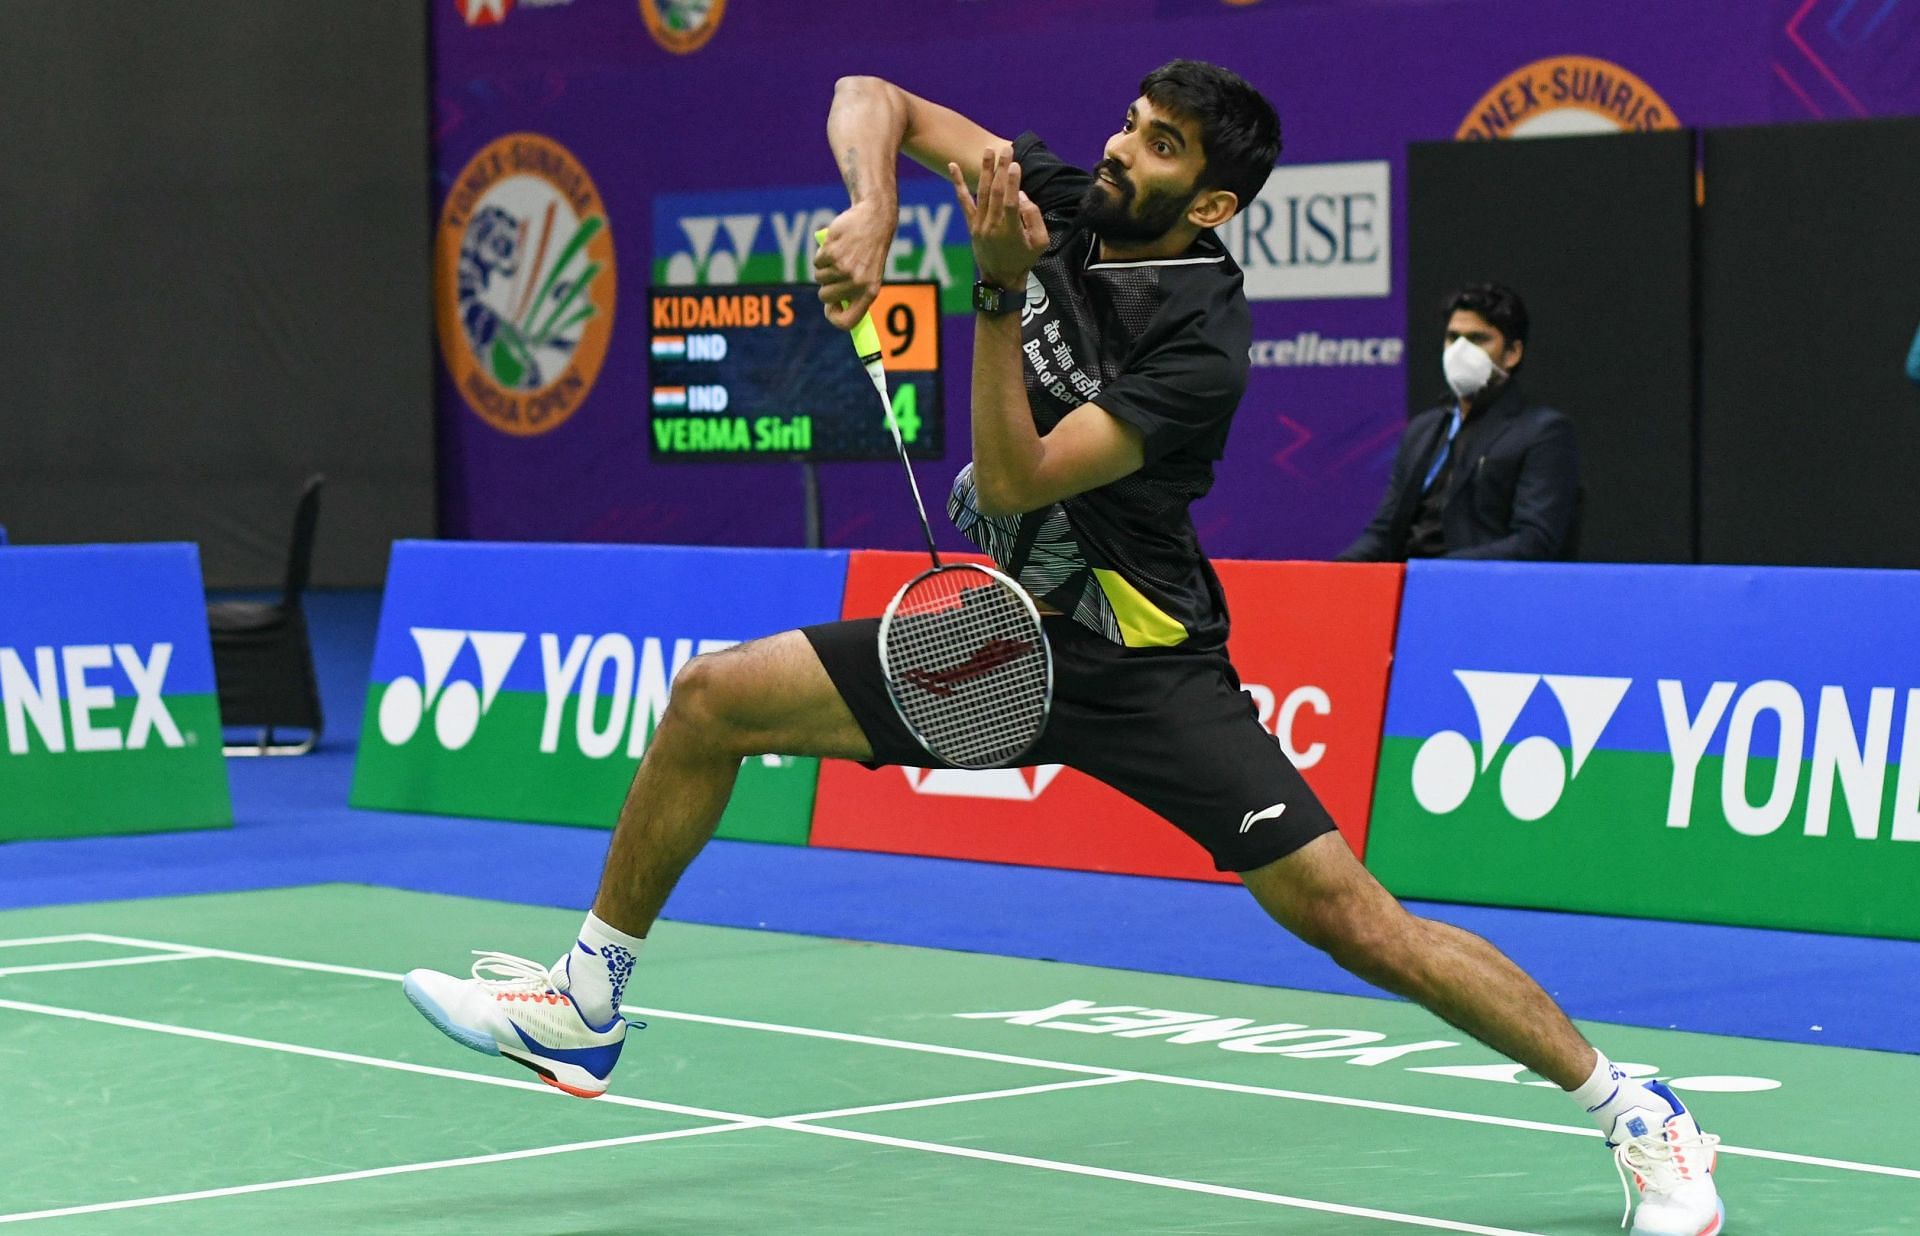 Fifth seed Kidambi Srikanth beat Misha Zilberman of Israel 21-18, 21-6 in the Korea Open men&#039;s singles second round on Thursday. (Pic credit: BAI)